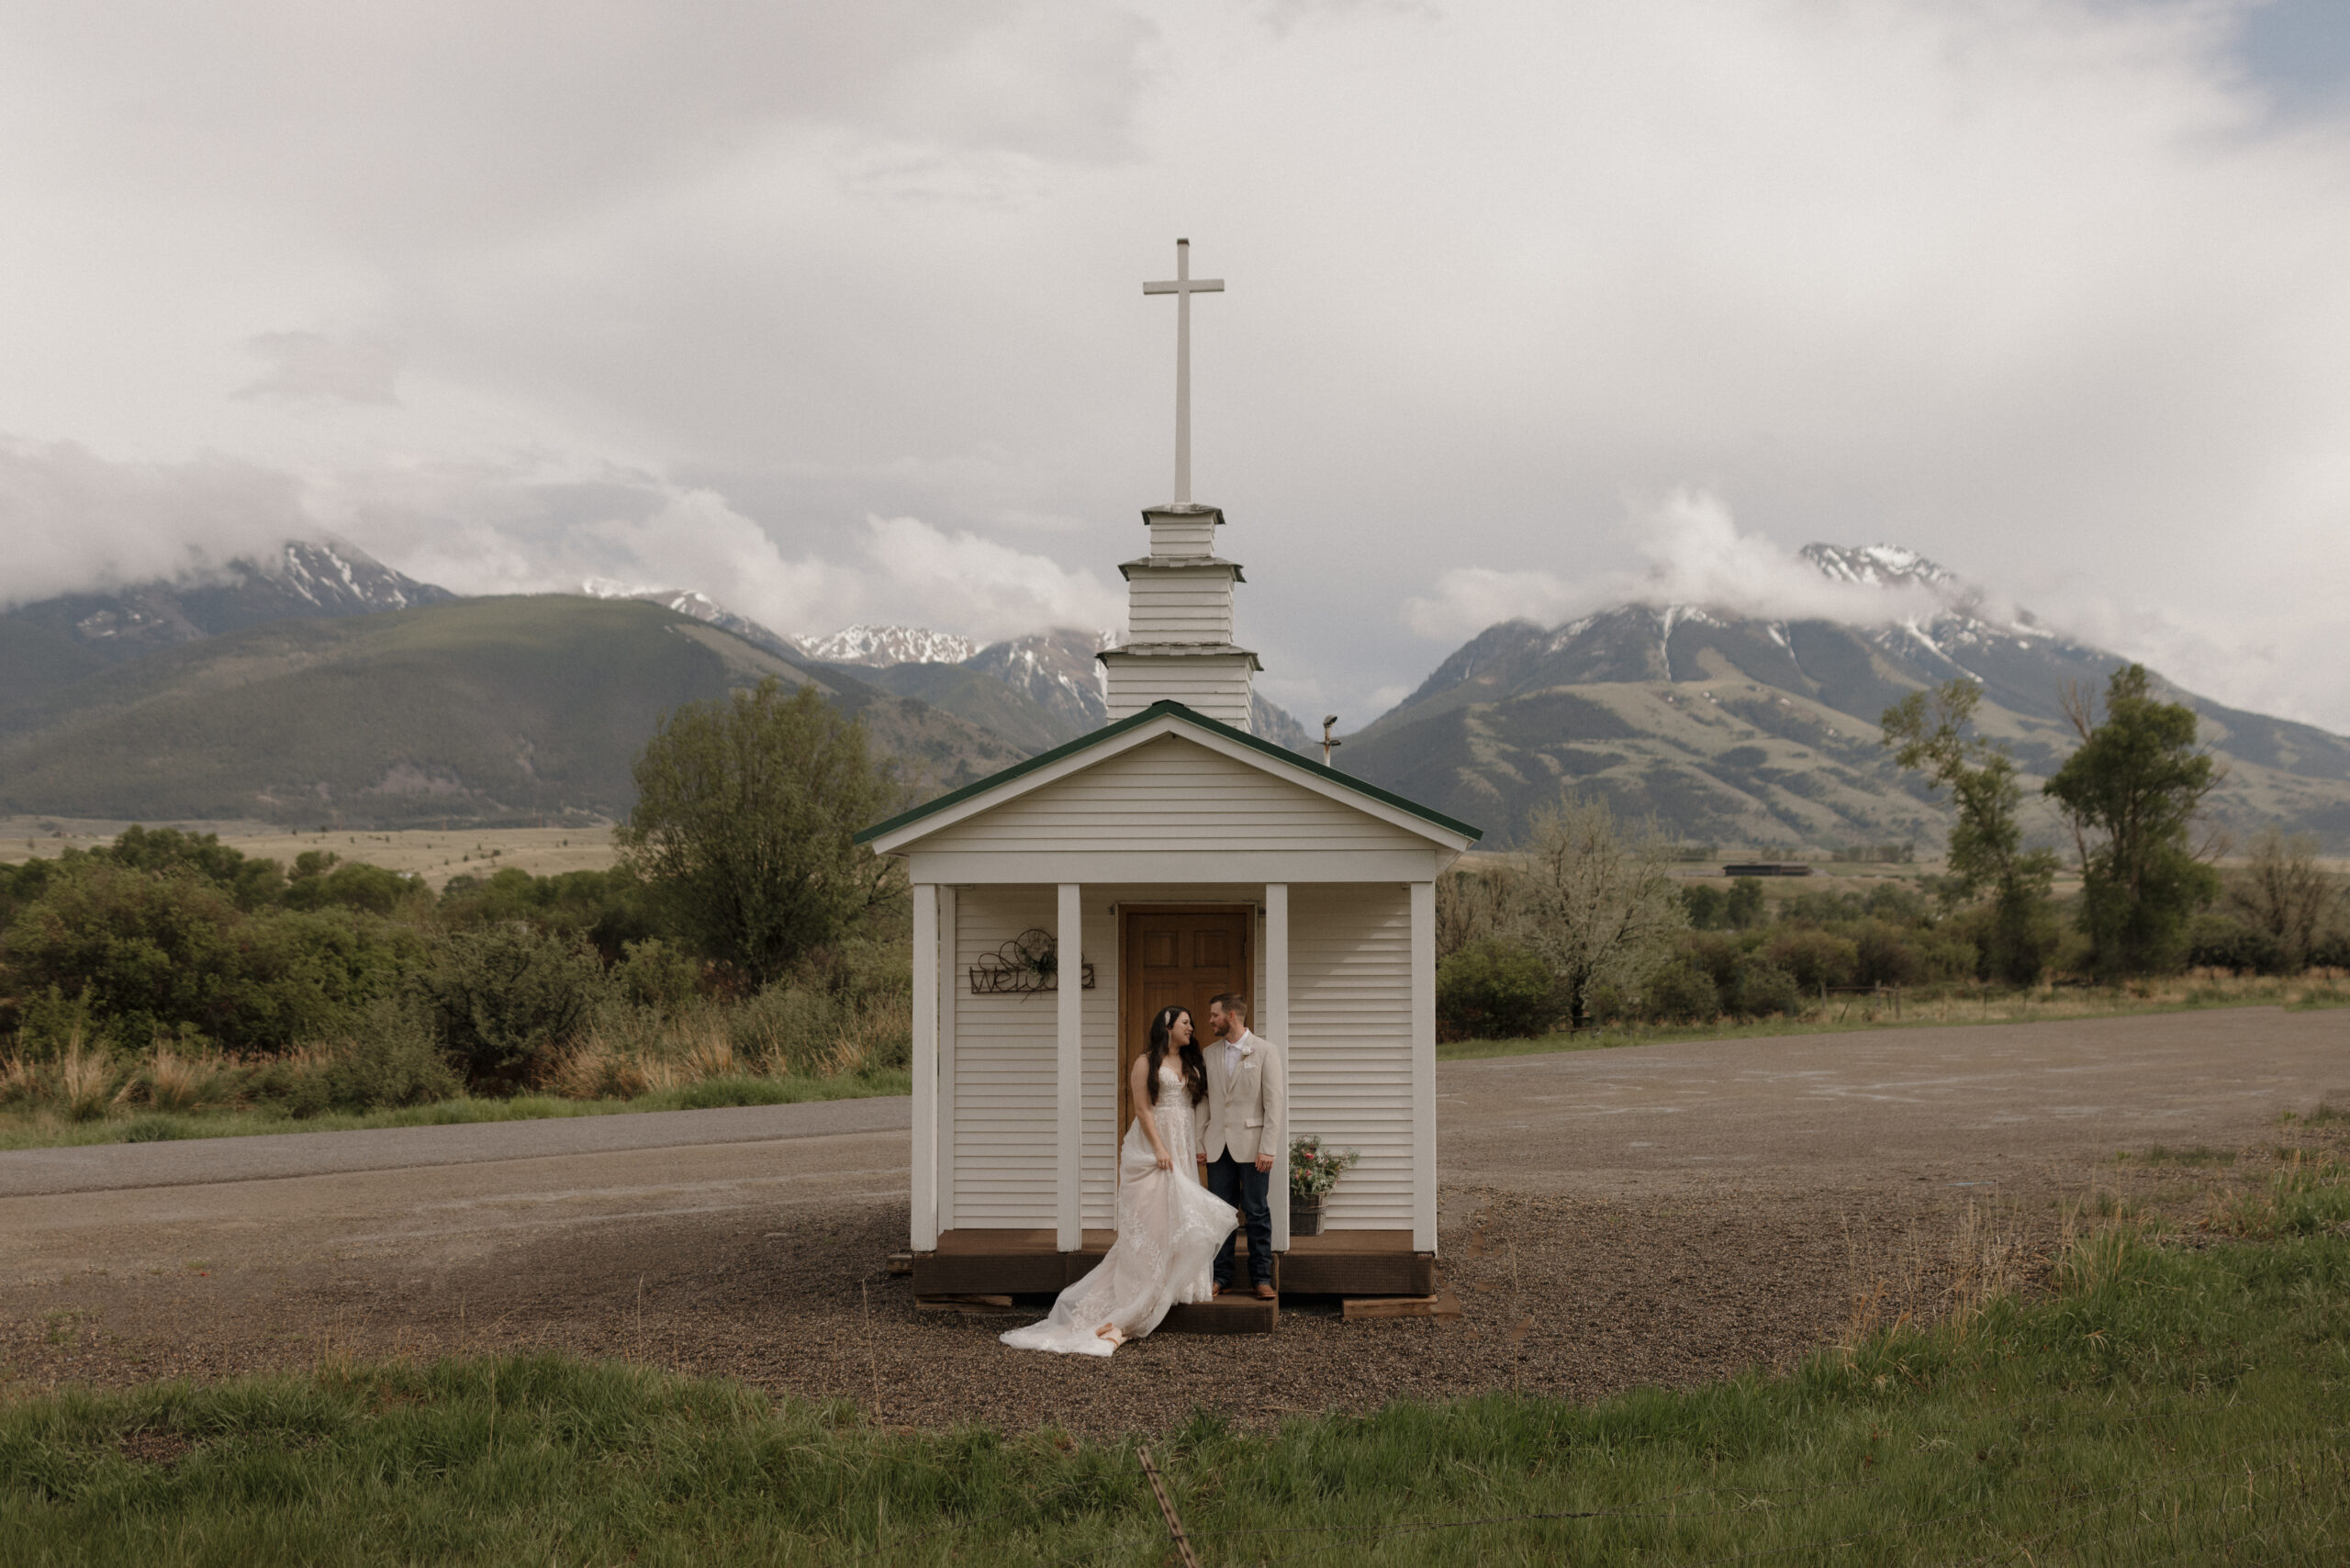 eloping in montana at a tiny church in the mountains of Paradise Valley